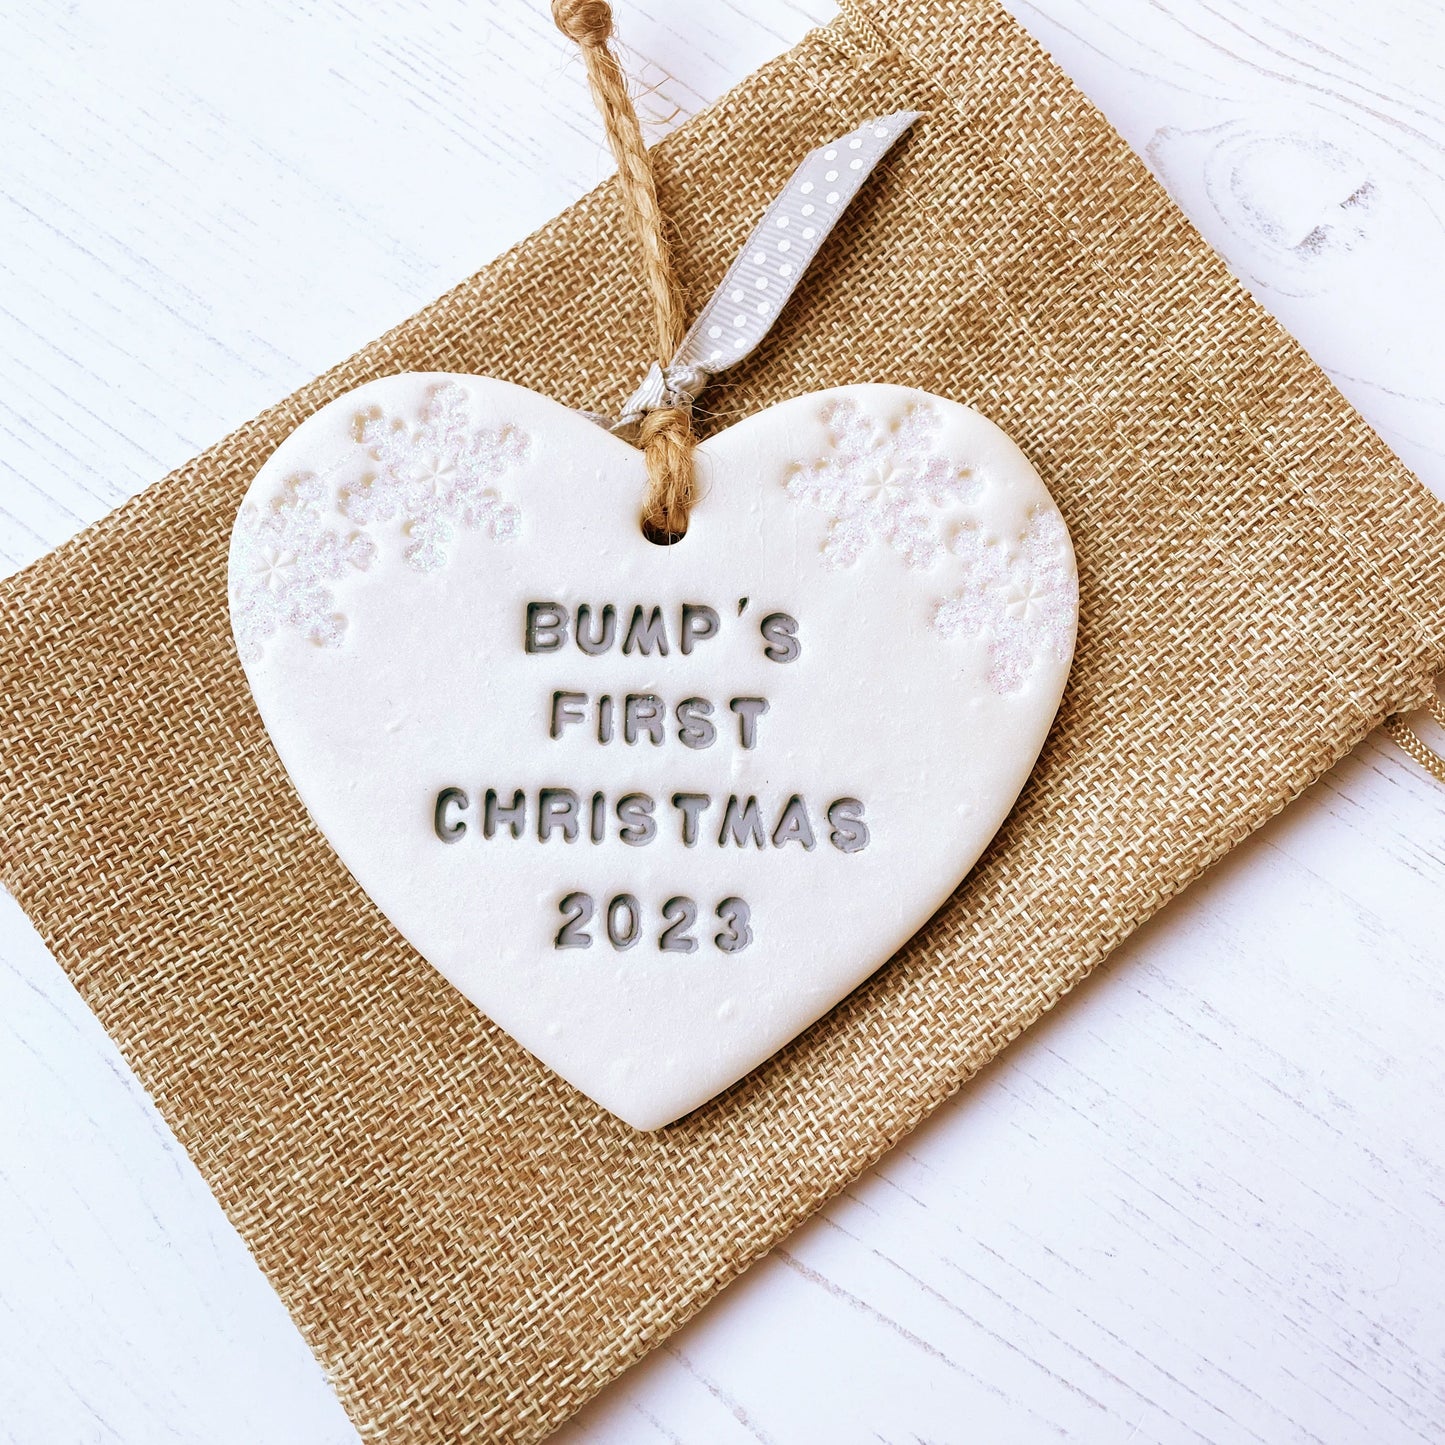 Personalised bump's first Christmas heart ornament, pearlised white clay with BUMP'S FIRST CHRISTMAS 2023 painted grey, decorated with 2 iridescent glitter snowflakes on either side of the top of the heart